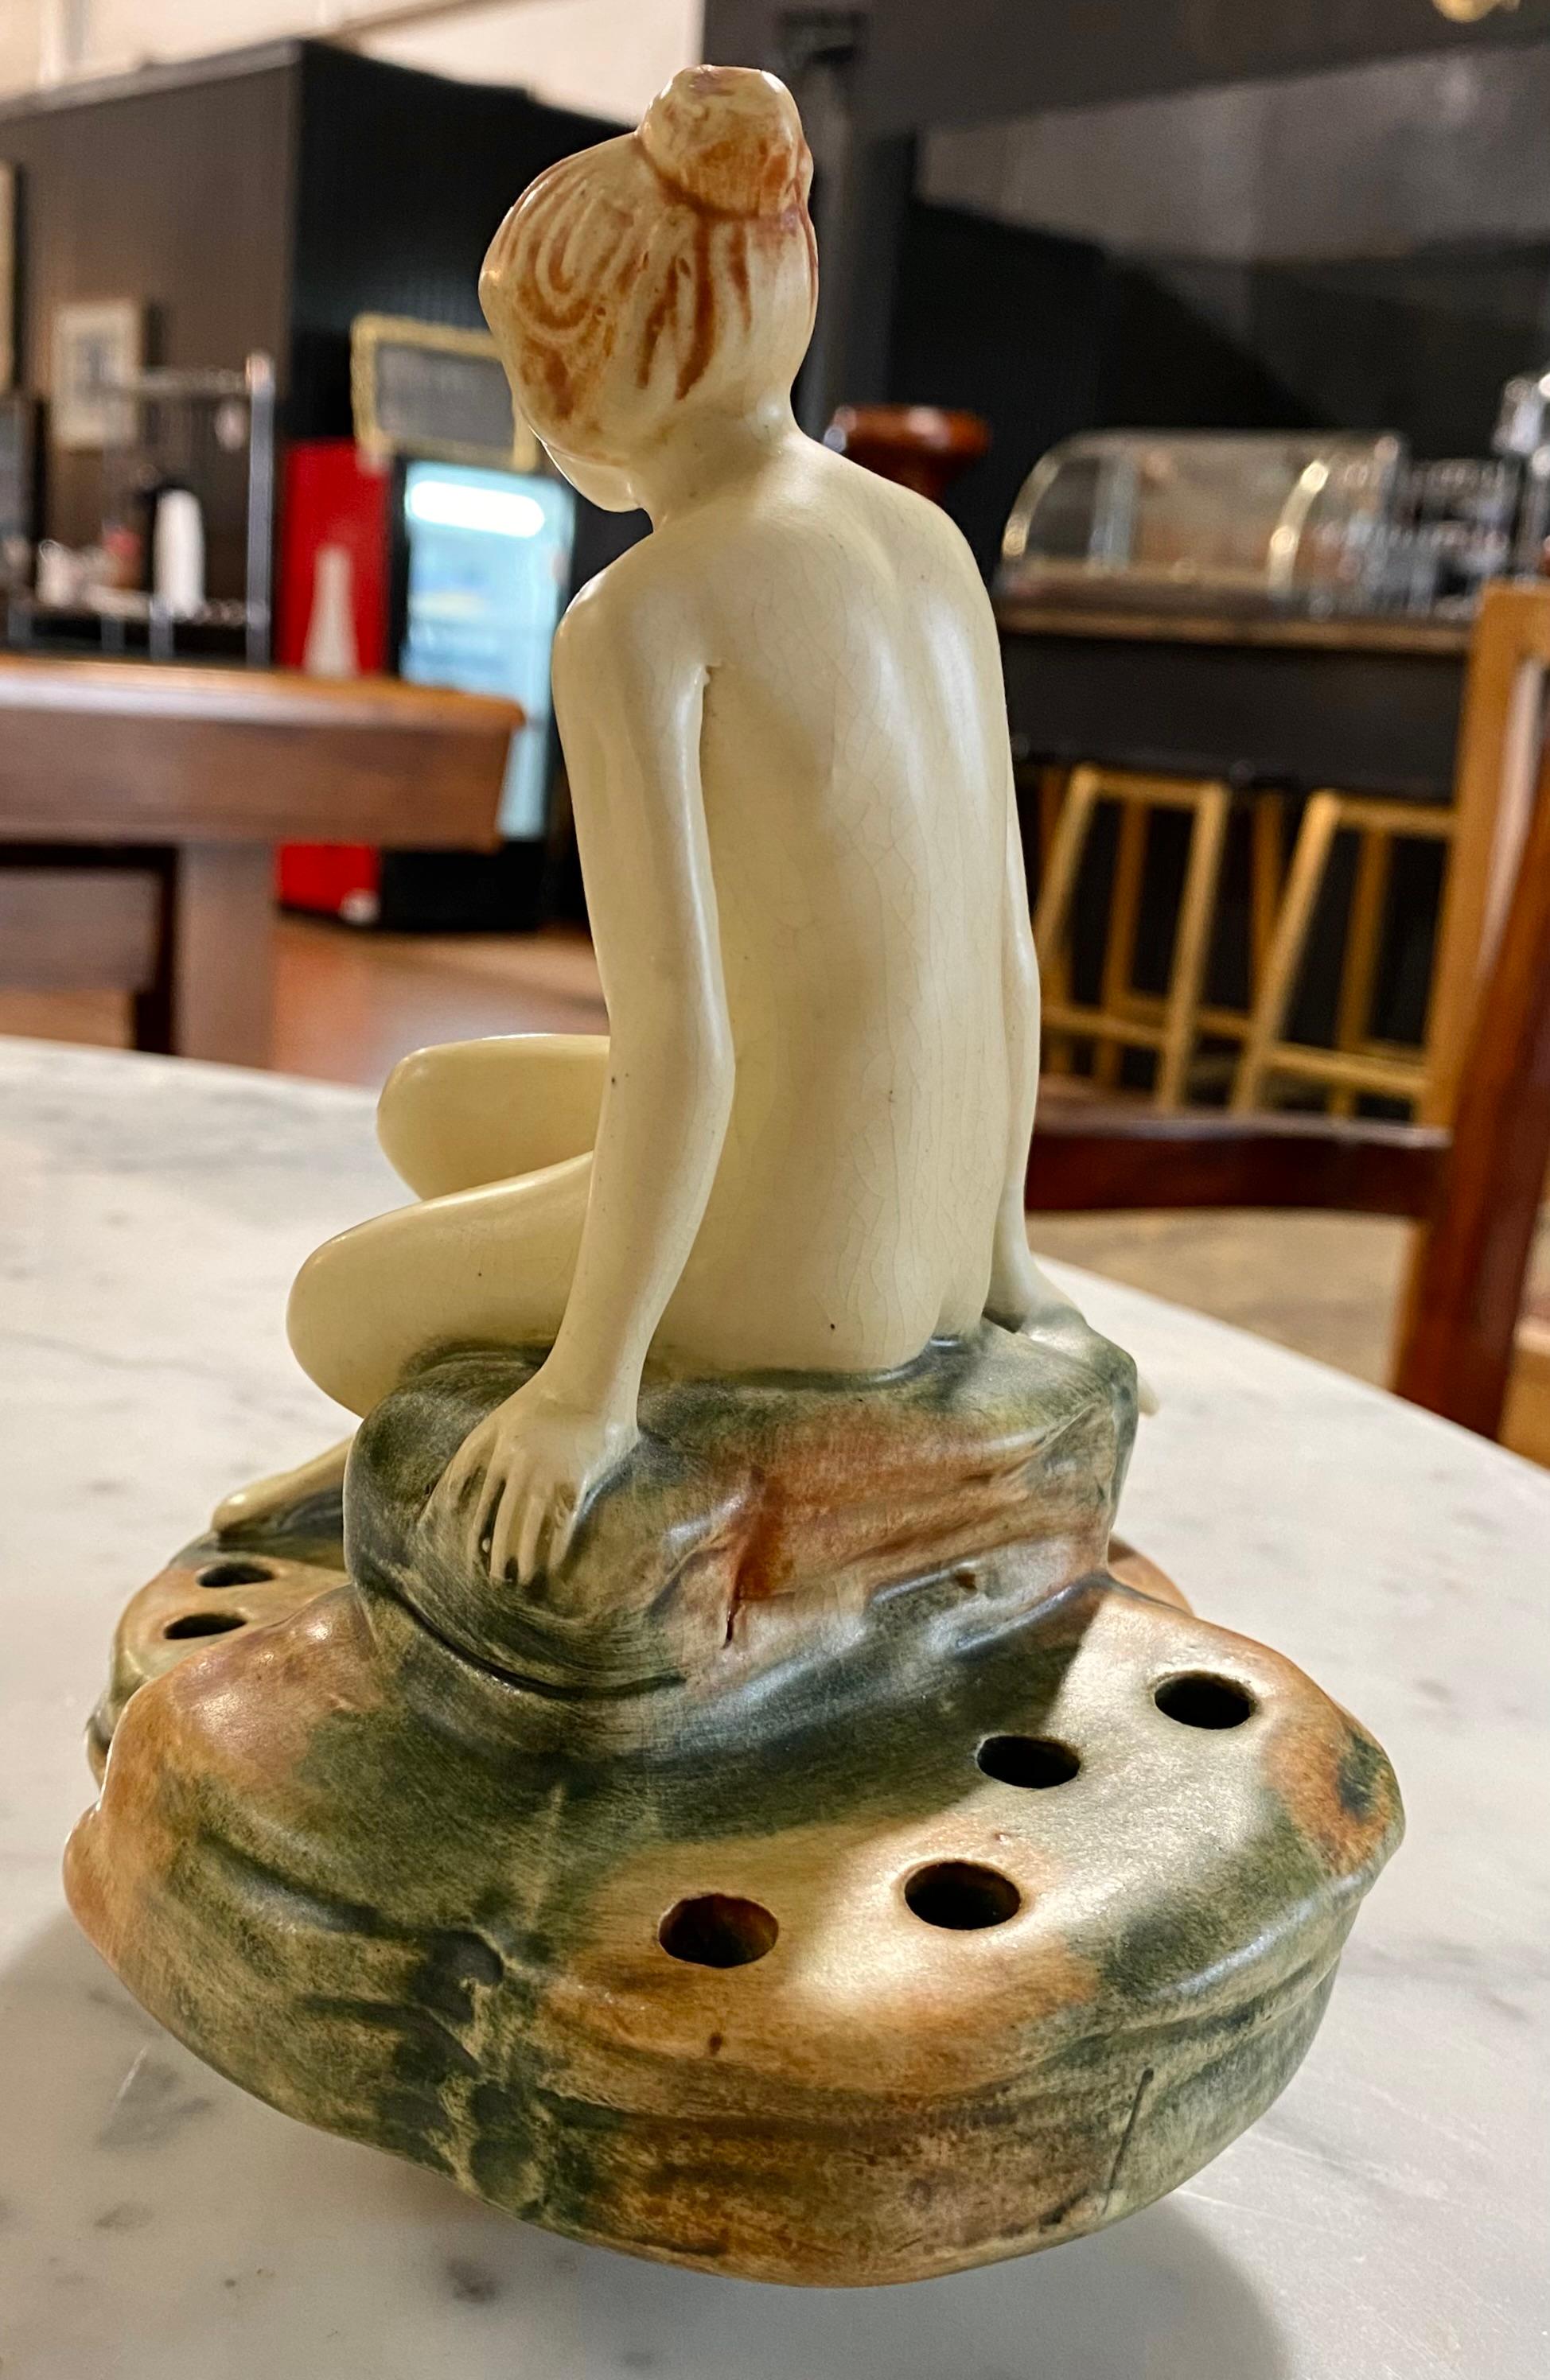 A spectacular 1920 Weller Art Nouveau seated nude woman, a swan and a flower frog. A lovely addition to enjoy for your collection. 

Weller Pottery is an Ohio-based company that was founded in 1872 by Samuel A. Weller. The company's products include